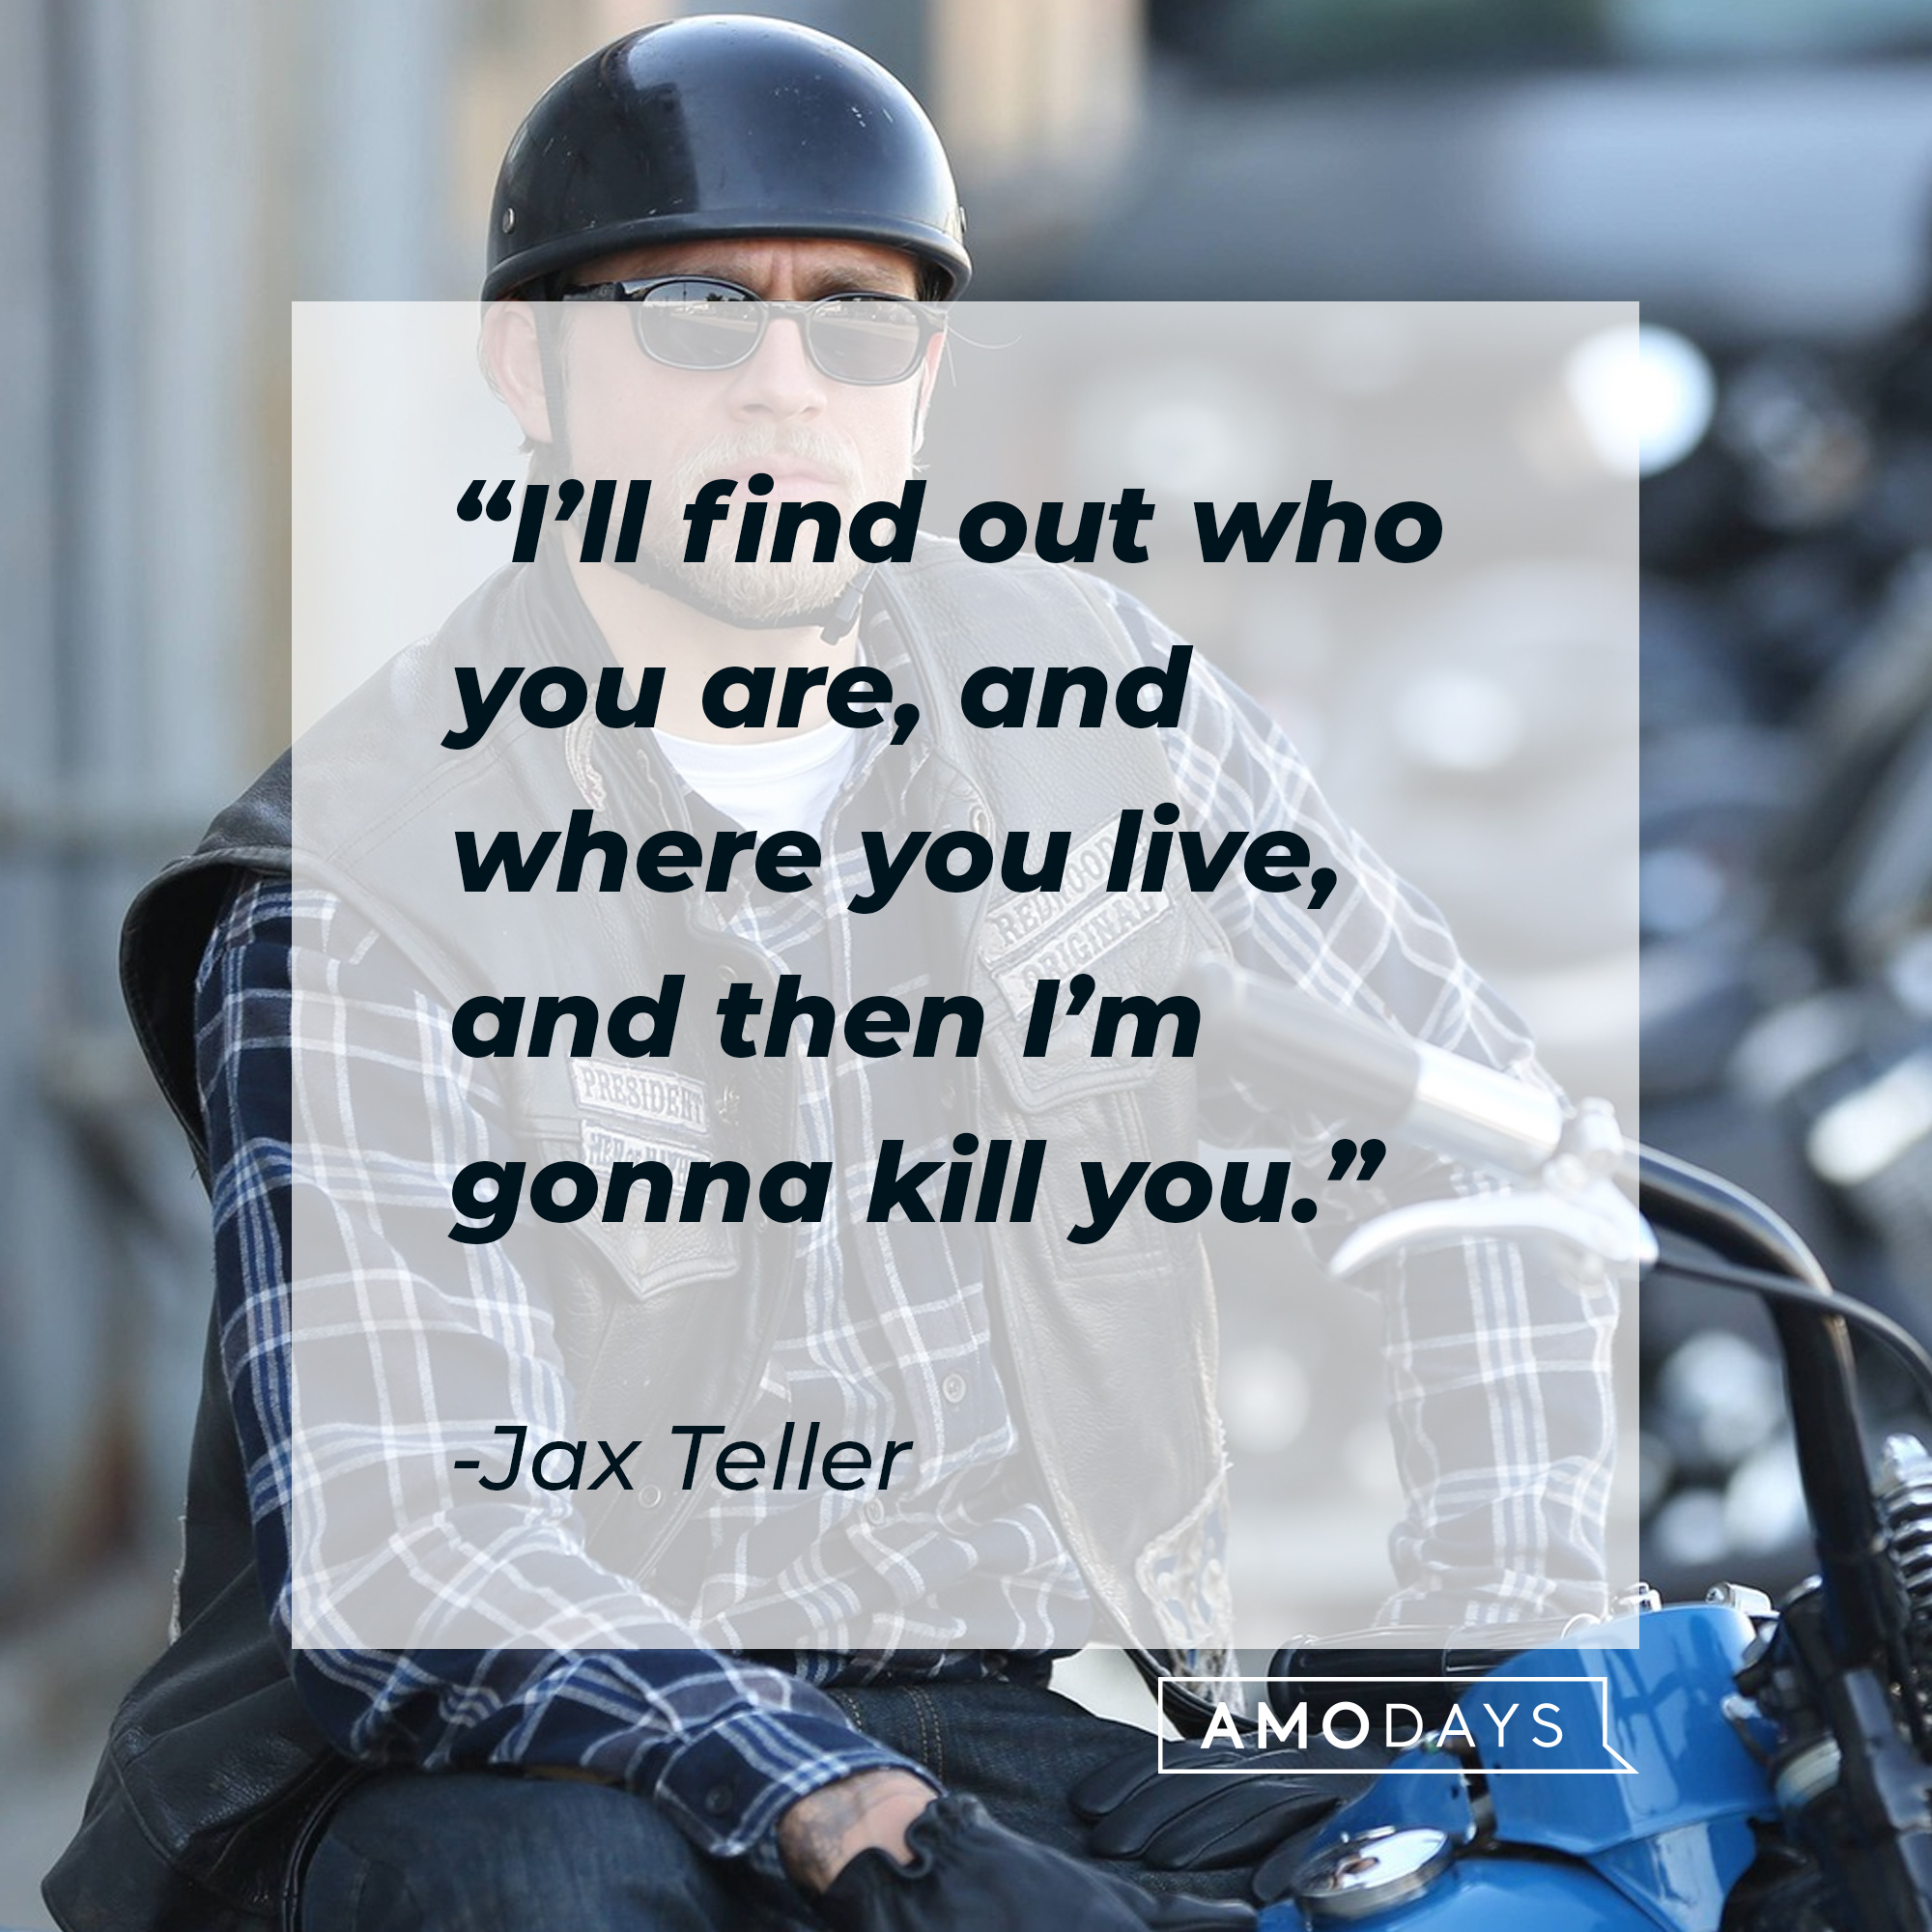 Jax Teller with his quote: “I’ll find out who you are and where you live, and then I’m gonna kill you.” |  Source: facebook.com/SonsofAnarchy